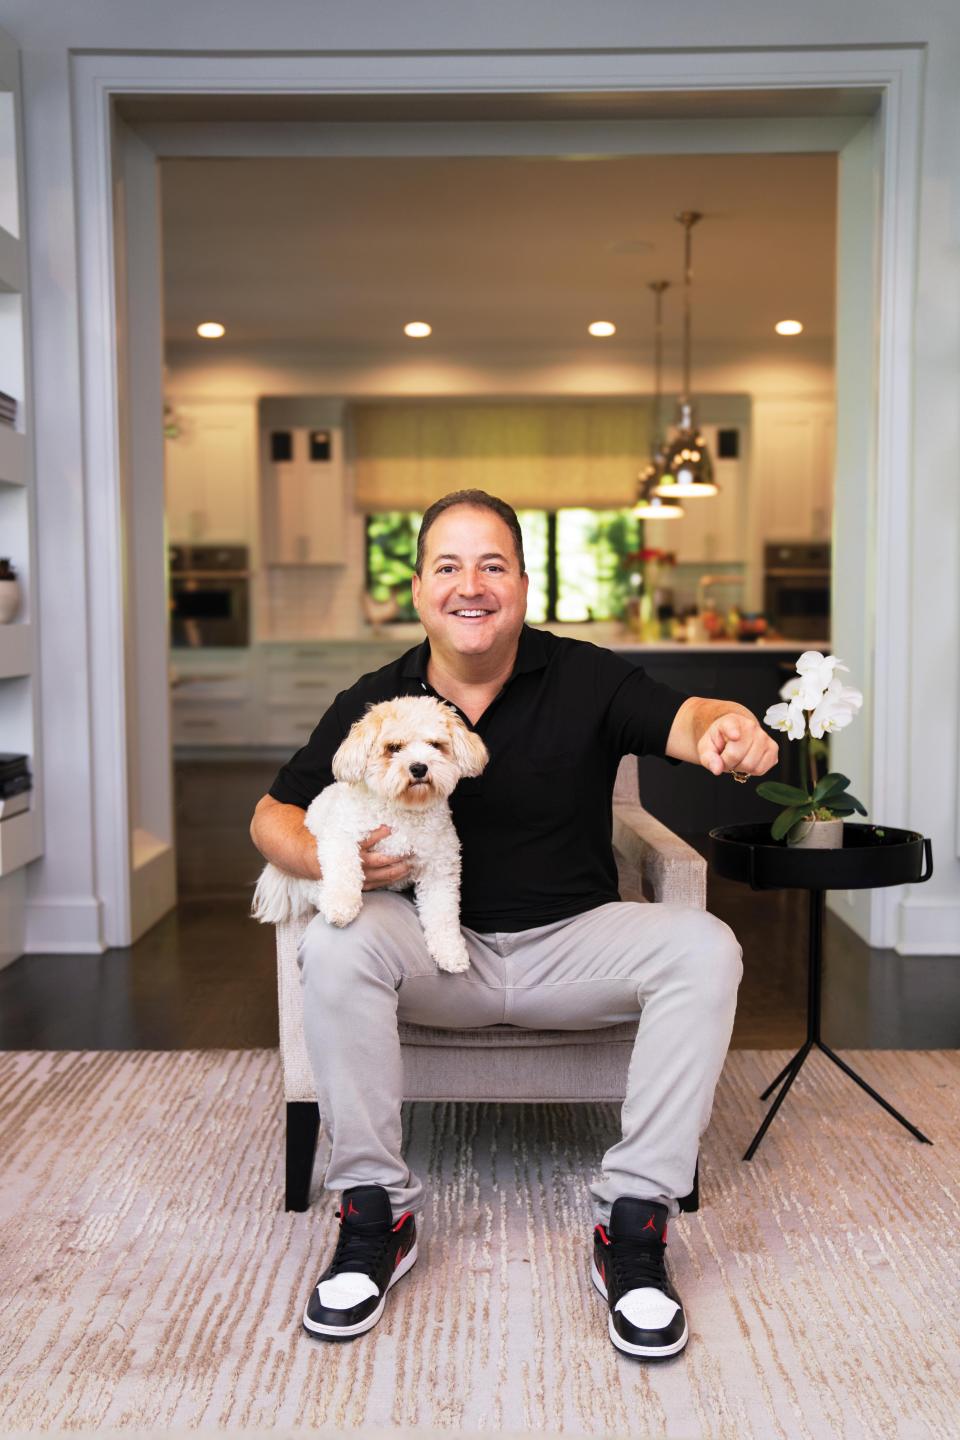 Celebrity chef Josh Capon at his Tenafly home with his dog Cody.